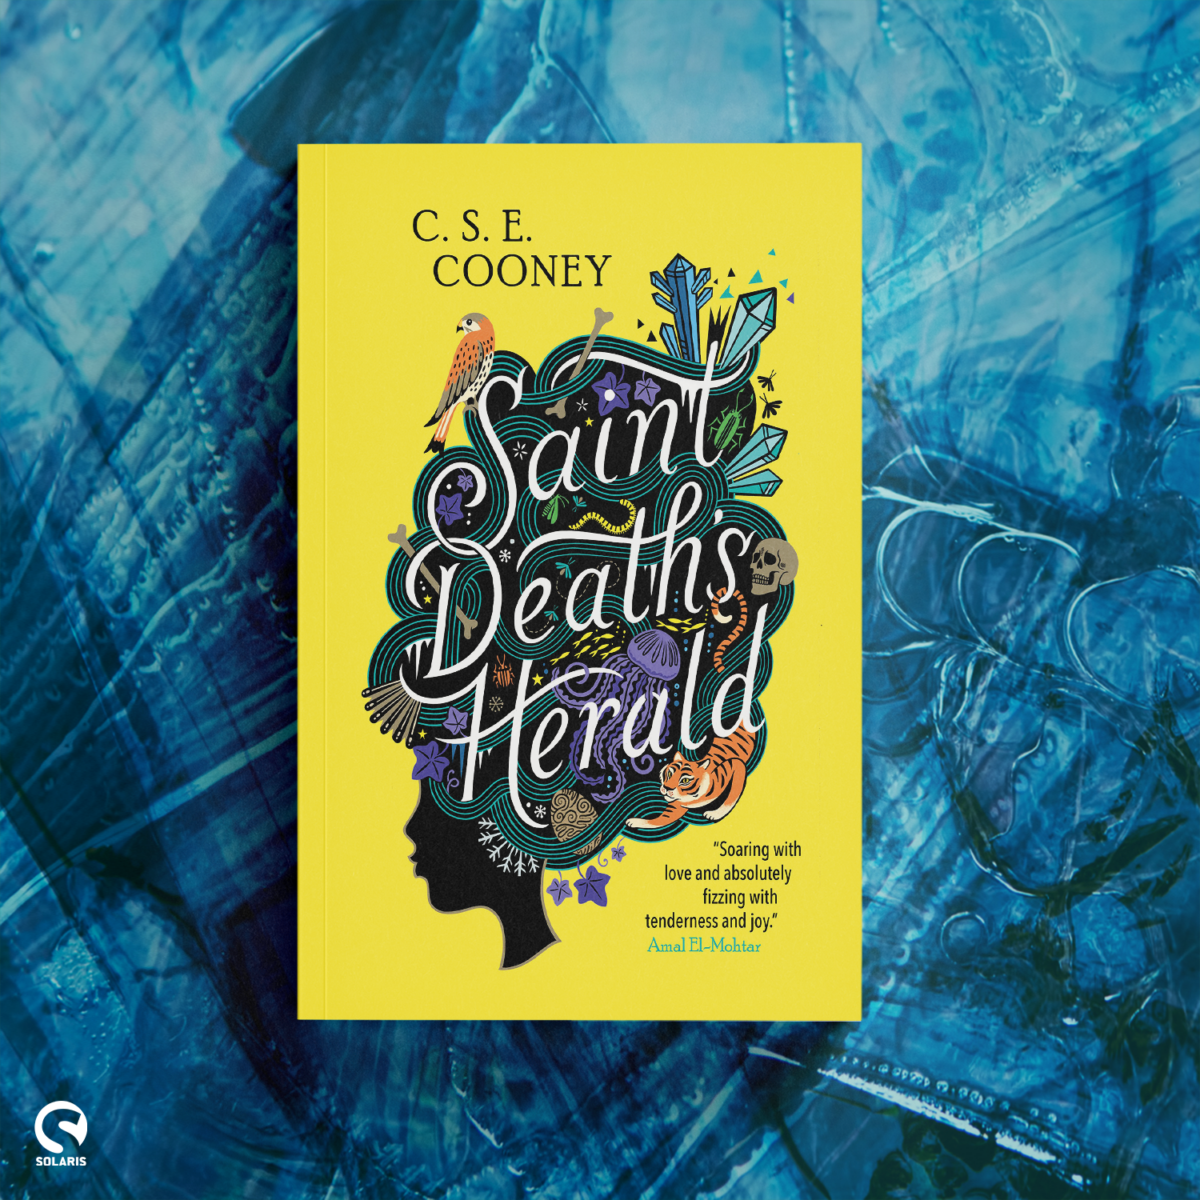 Revealing the cover of Saint Death’s Herald by C. S. E. Cooney!